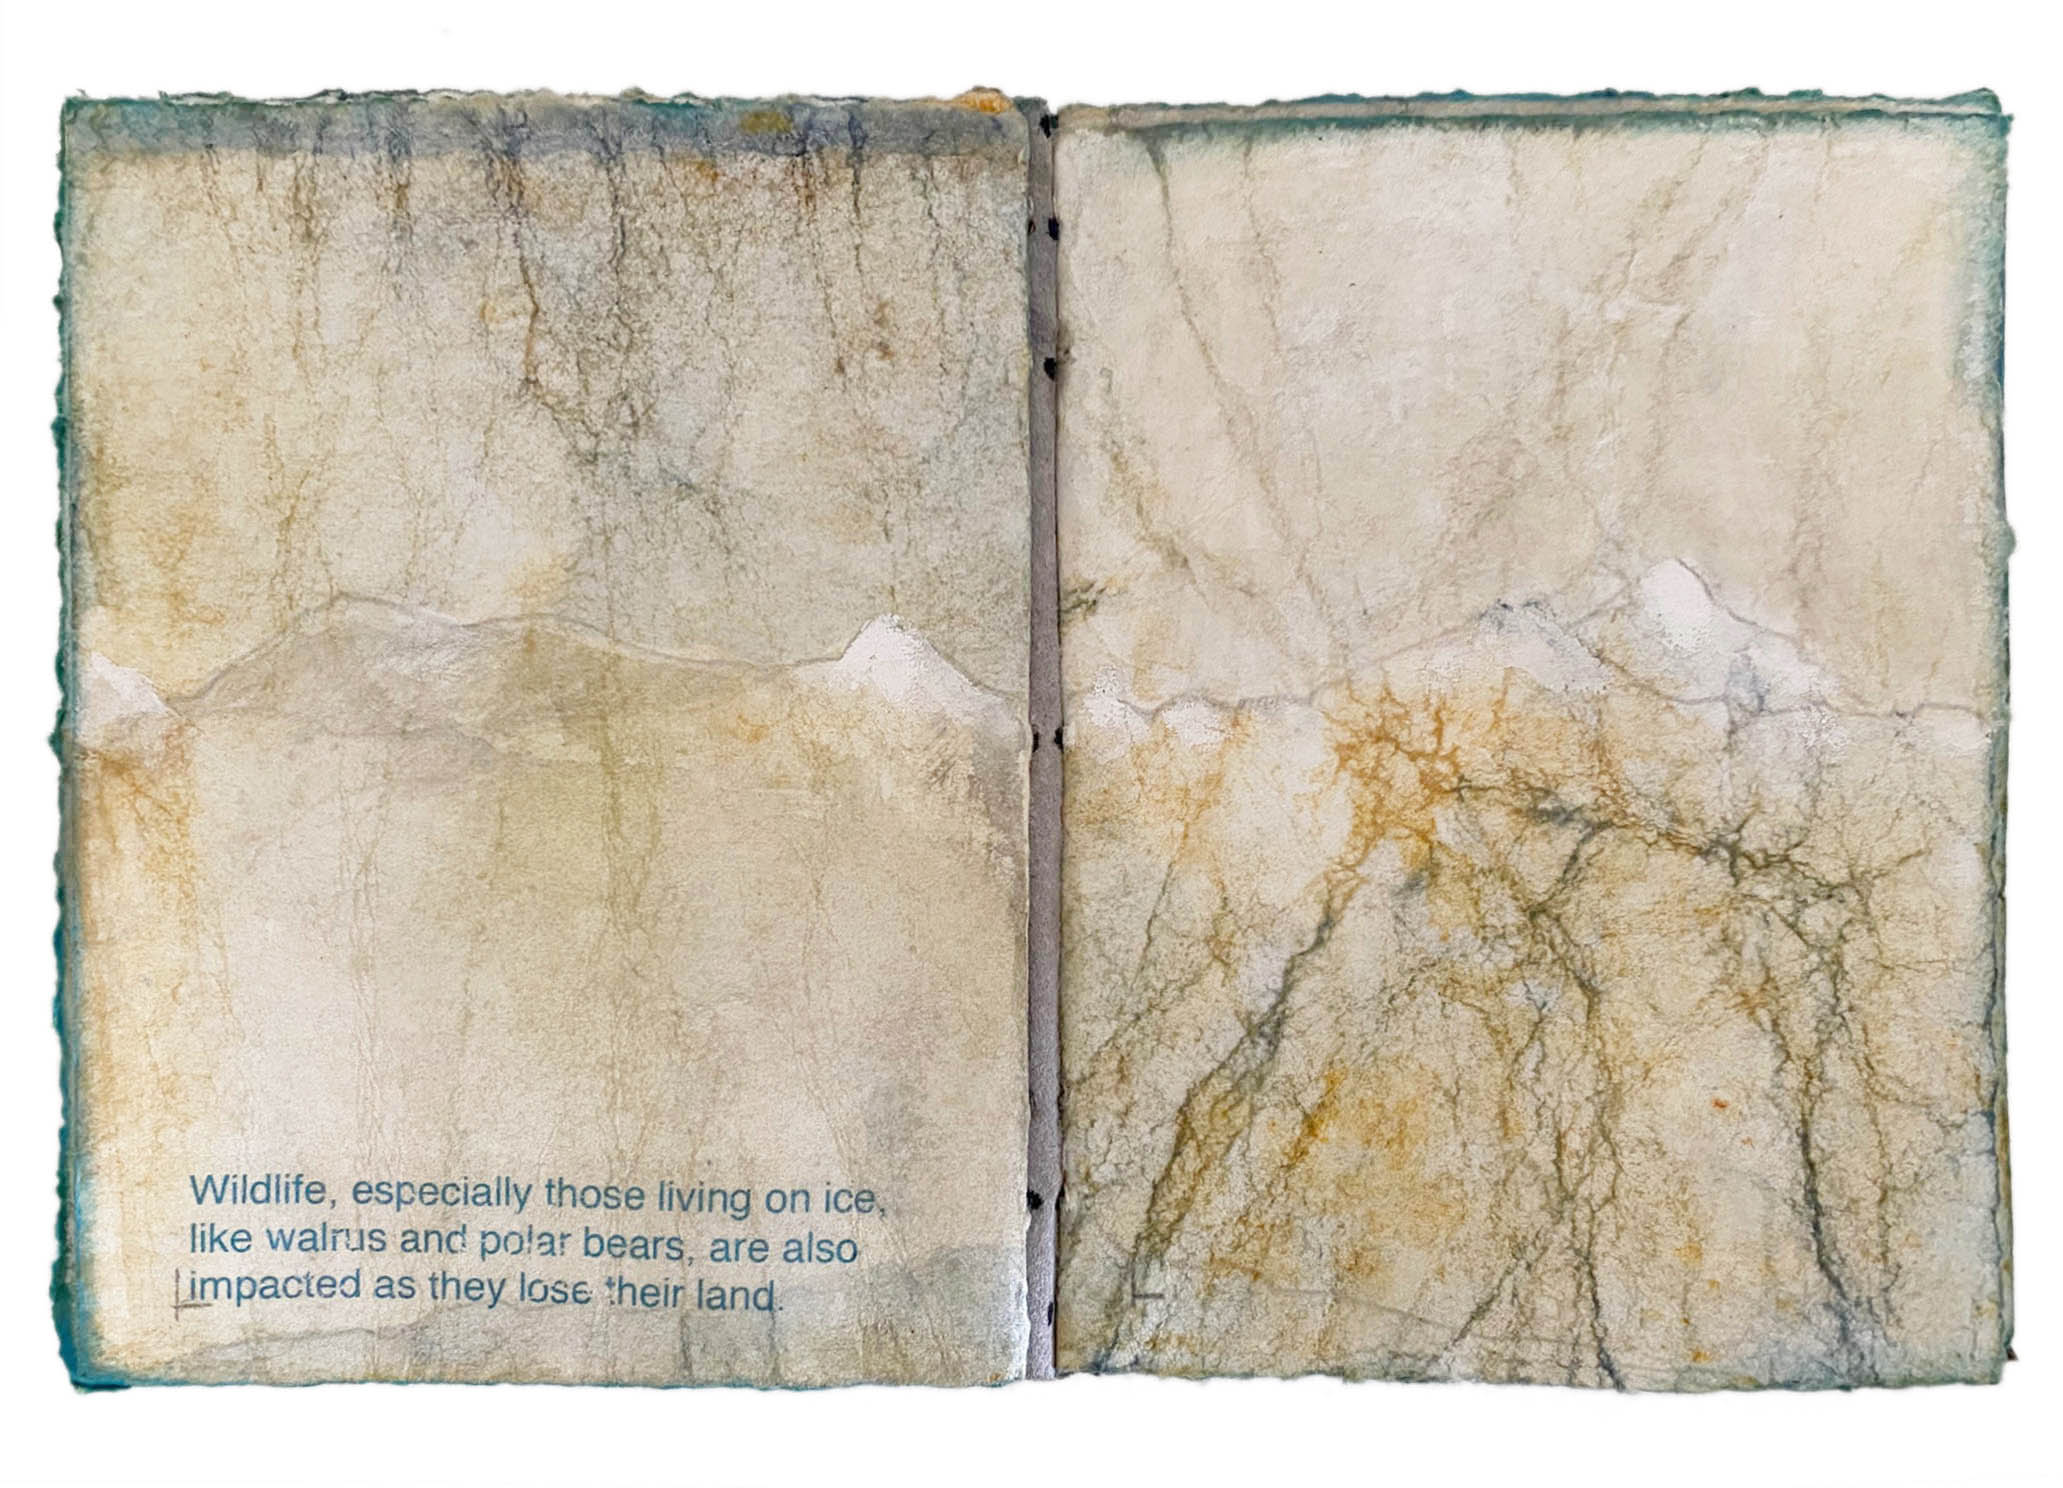 Glaciers Melt
I took to Alaska a small journal, 5” x 4” with 24 pages. The cover was made from eco printed leather over stiff paper. The top and bottom of the wrinkled pages had been dipped in either indigo or rust, creating an irregular horizon line. During the trip I drew and painted the mountains with graphite, water color, white gouache and chalk. The text throughout the book reads: Glaciers Melt Glaciers are giant rivers of ice formed over centuries as fallen snow is compressed into layers of ice. They flow out to sea as ice shelves where pieces break off, or calve, to form icebergs. Today, about 10% of land area on Earth is covered with glacial ice. 90% is in Antarctica and 10% is in the Greenland ice cap. Glaciers now lose up to 390 billion tons of ice and snow per year. The largest regional losses are in Alaska, followed by the Southern Andes and the Arctic. Seventy five billion tons of ice from Alaskan glaciers are being lost each year and 95% of the oldest and thickest ice in the Arctic is already gone. If emissions continue to rise unchecked, the Arctic could be ice free in the summer by 2040 and melting on Greenland would double by the end of the century. By that time, ICCP projects that sea level will rise between 4 and 35”. At the high end, it would be an unmitigated disaster. As glaciers melt and oceans warm, ocean currents will continue to disrupt weather patterns. Where and when fish spawn will continue to change and some fishing industries will fail. Wildlife, especially those living on ice, like walrus and polar bears, are also impacted as they lose their land. As storms become more intense, coastal flooding will become more frequent and communities will continue to be displaced and face billion-dollar disaster recovery bills. Addressing the causes of warming ocean and air temperatures are our only hope for slowing or reversing the glacial melt. Intergovernmental Panel on Climate Change Dorothy Simpson Krause, 2019